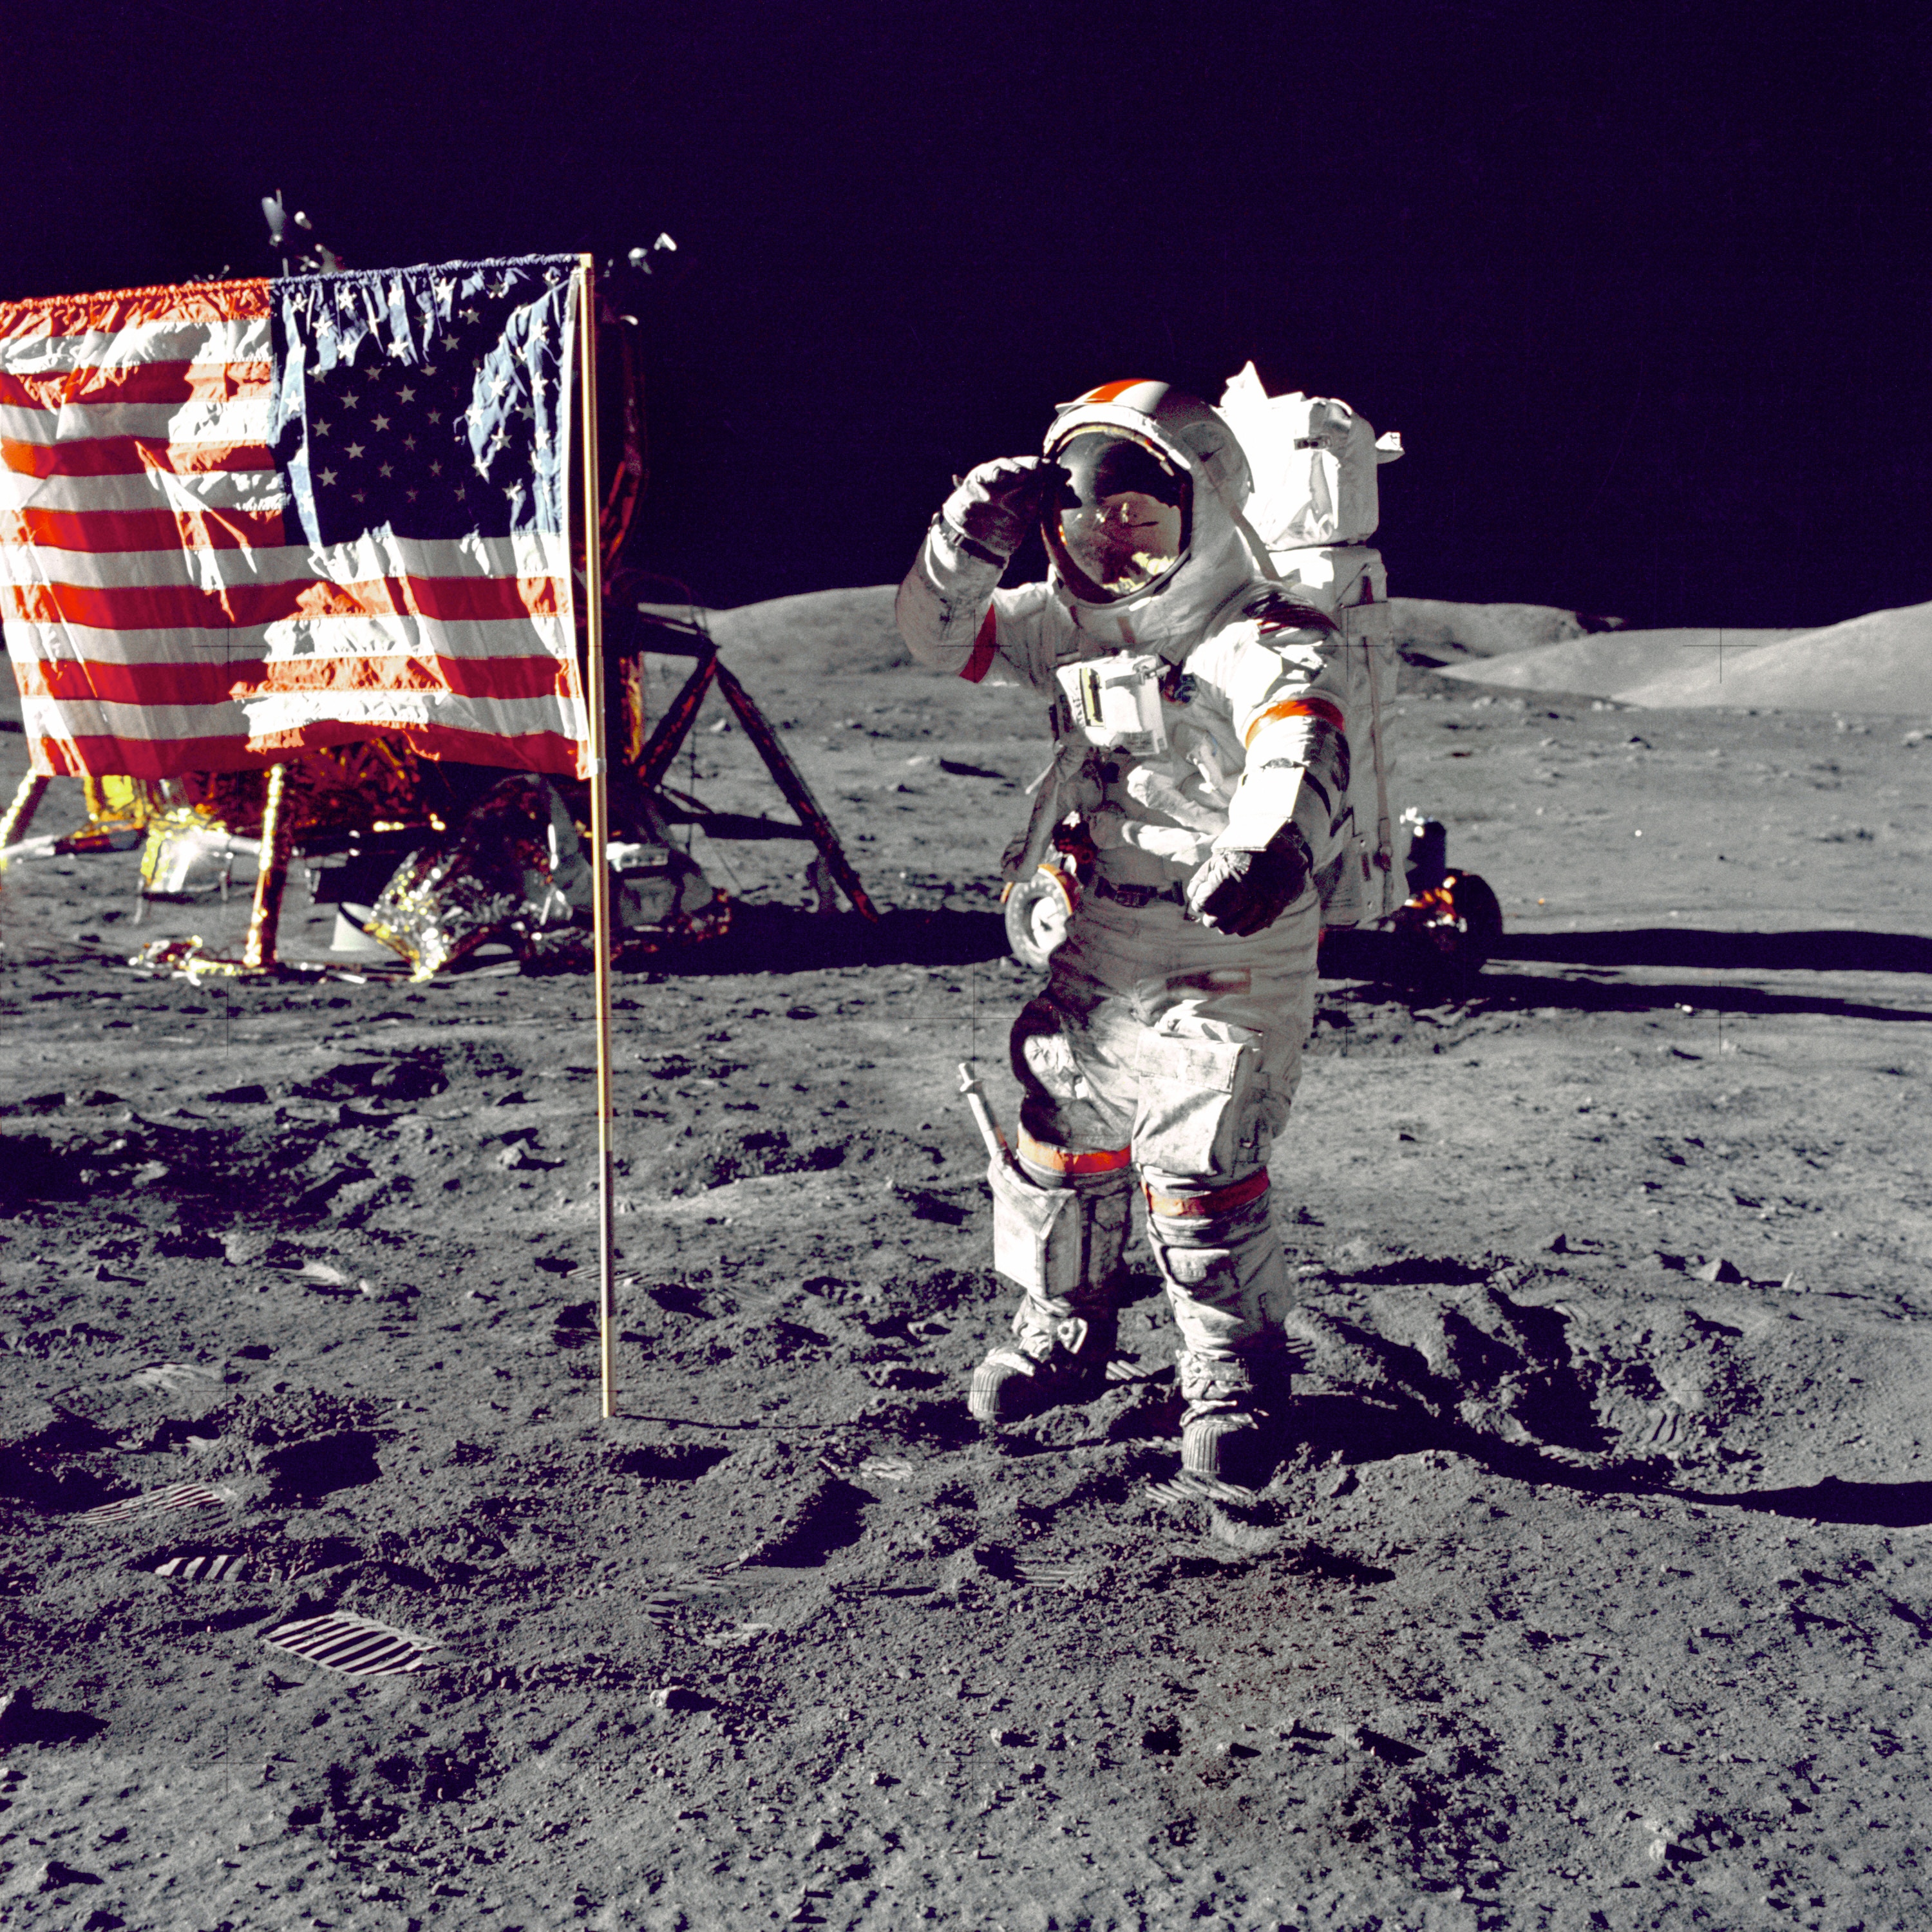 Cover image for  article: HISTORY’S Moment in Media: Neil Armstrong, Buzz Aldrin Walk on the Moon